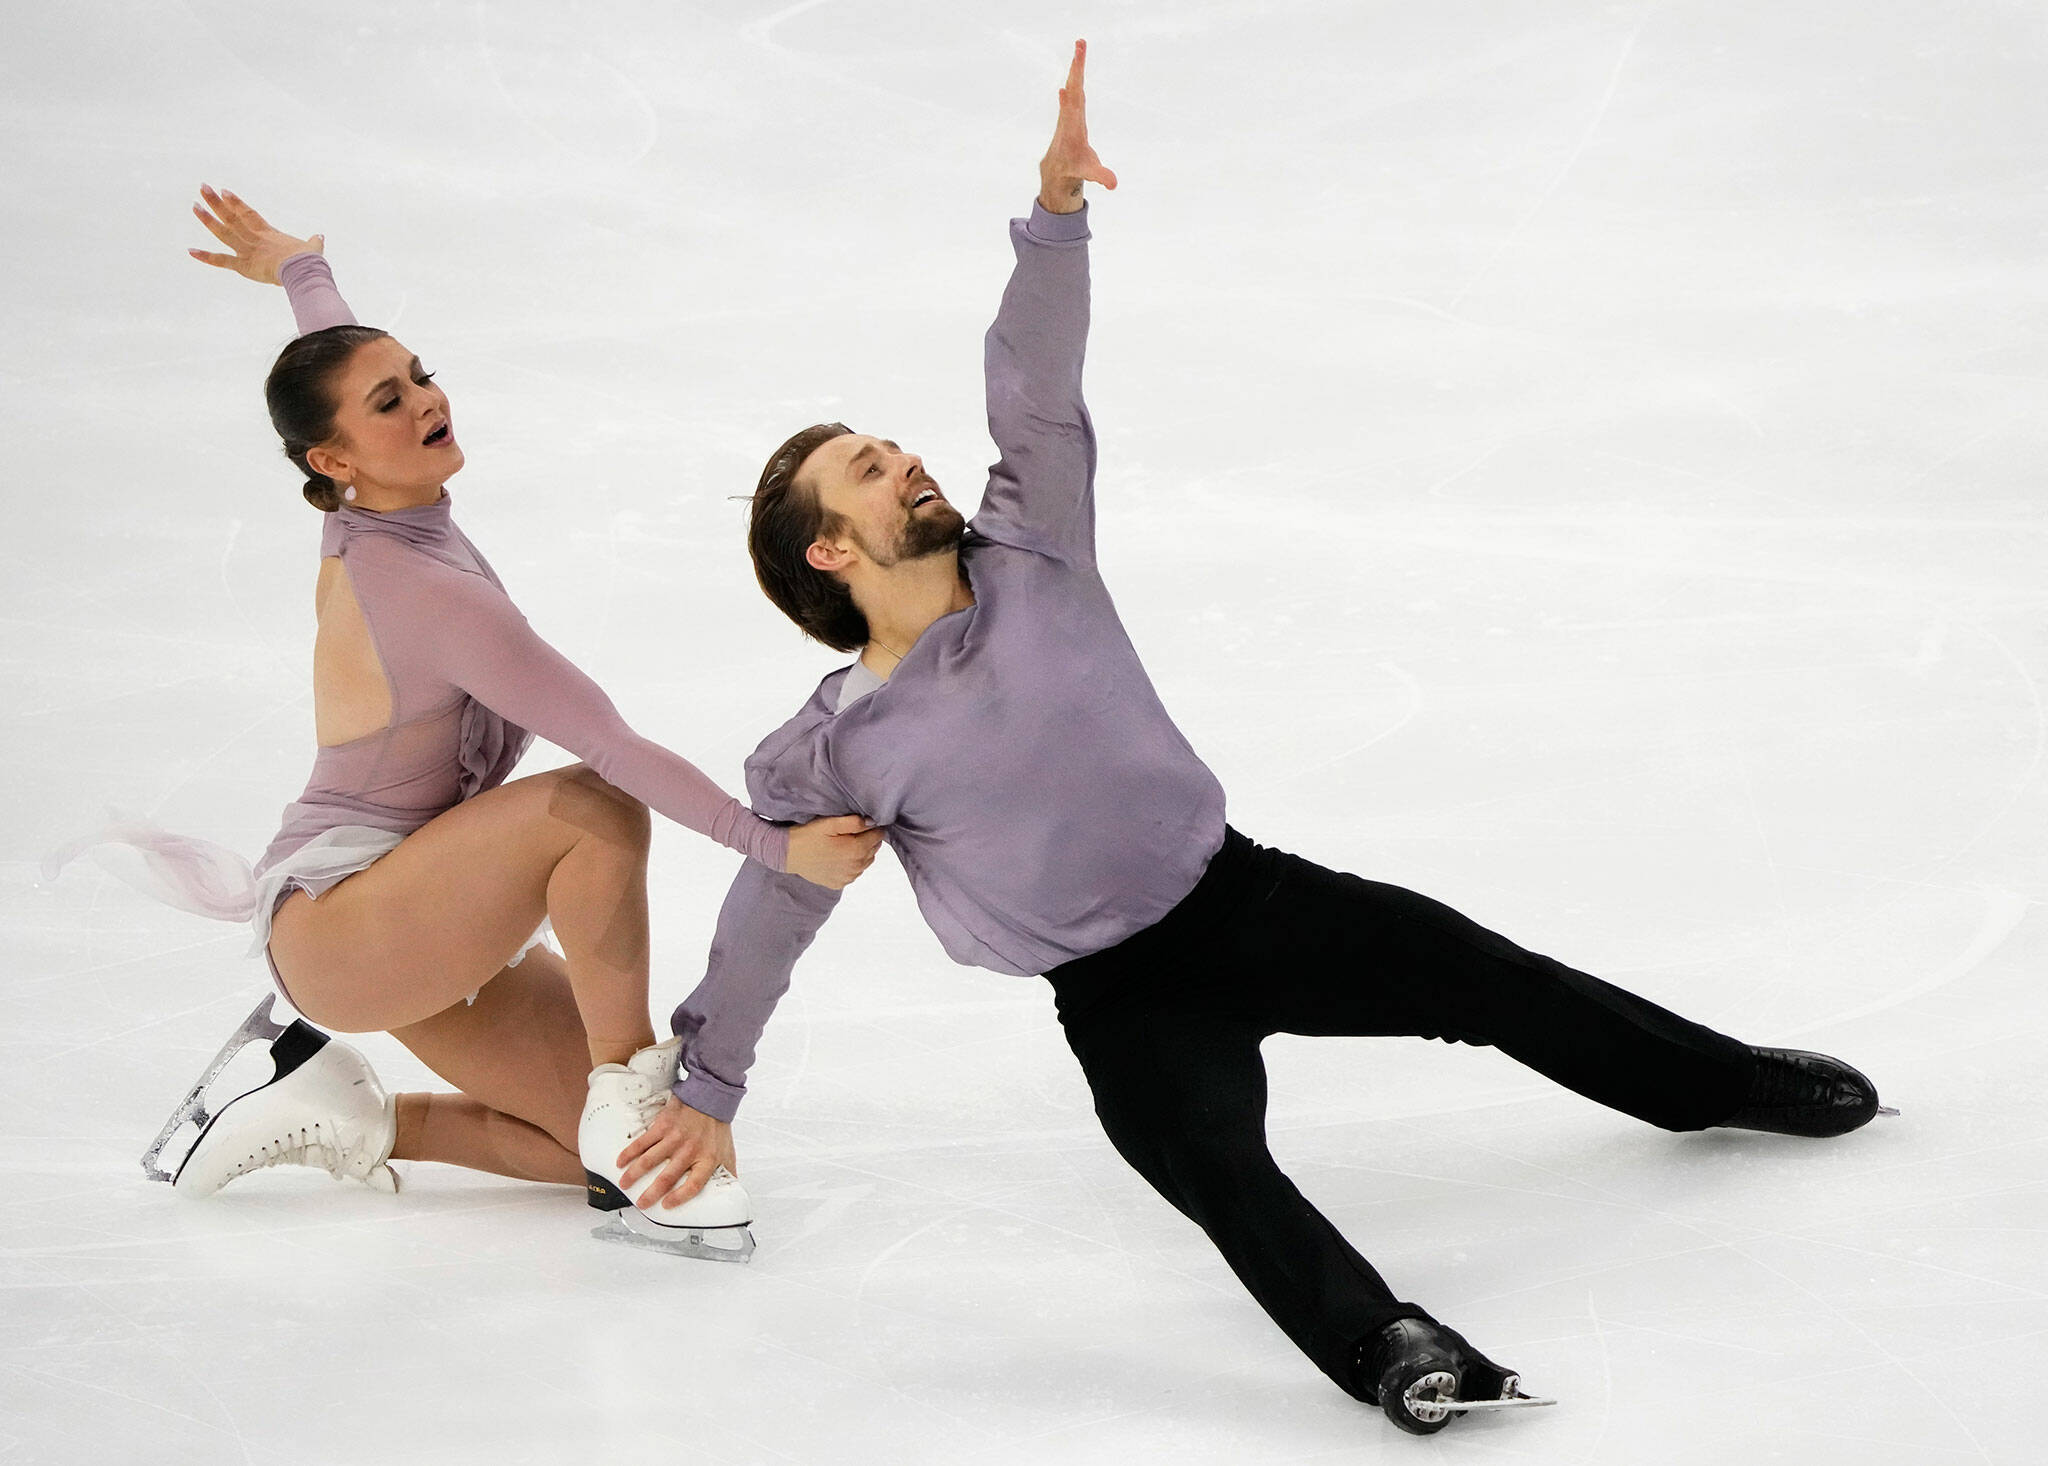 Edmonds native Jean-Luc Baker (right) and Kaitlin Hawayek of the United States perform in the ice dance free dance skating program during the ISU Grand Prix of Figure Skating Rostelecom Cup on Nov. 27, 2021, in Sochi, Russia. (AP Photo/Alexander Zemlianichenko)